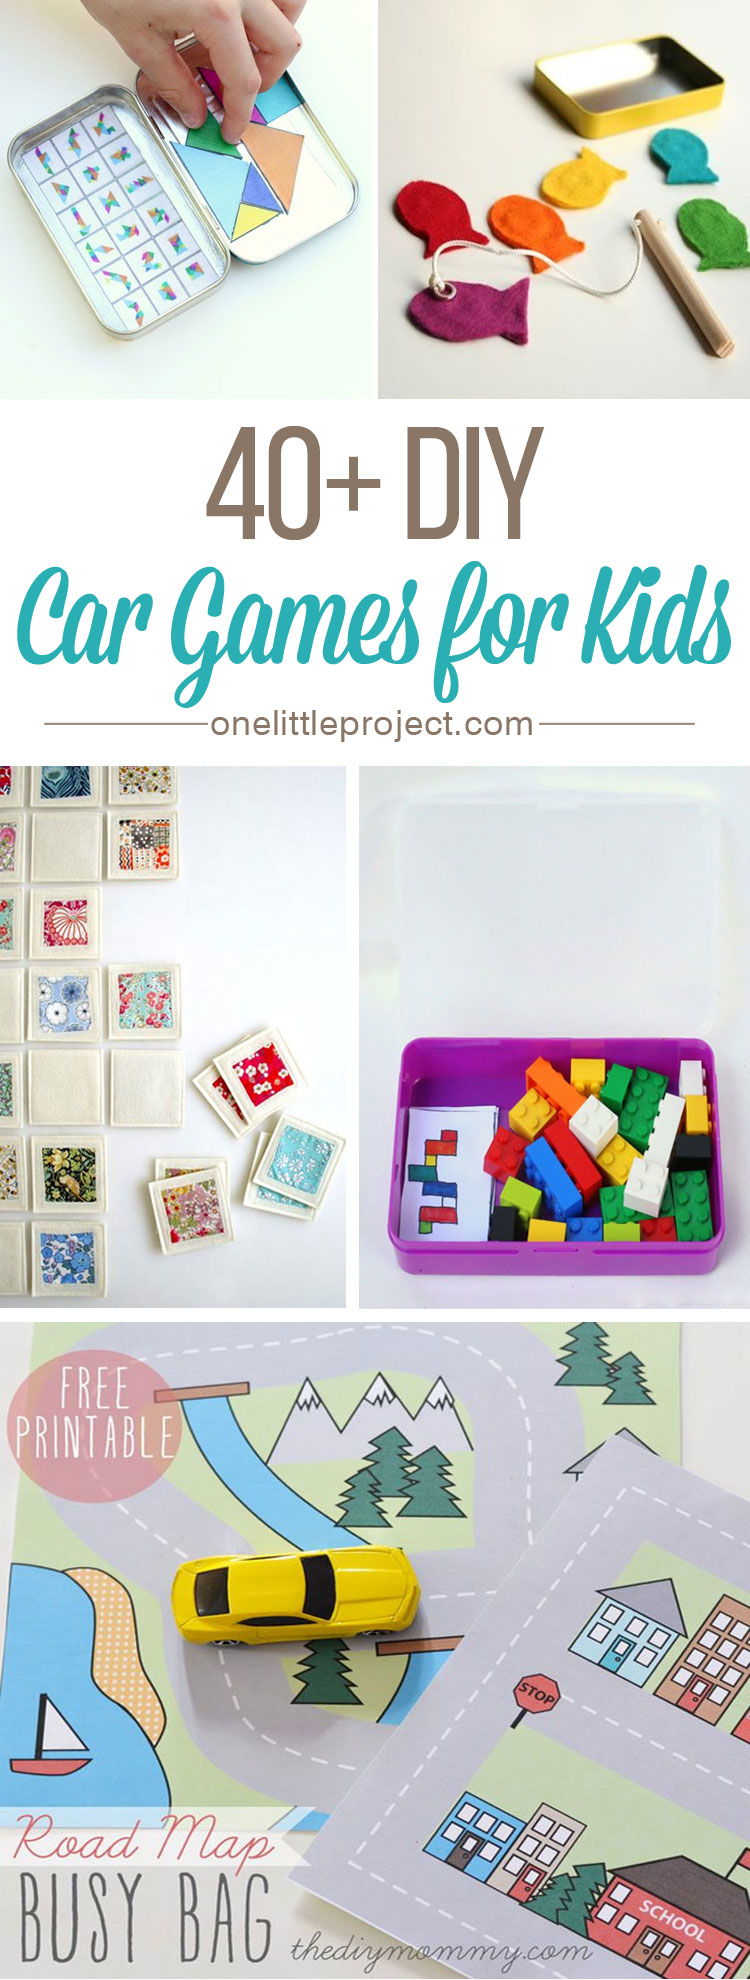 http://onelittleproject.com/car-games-for-kids/